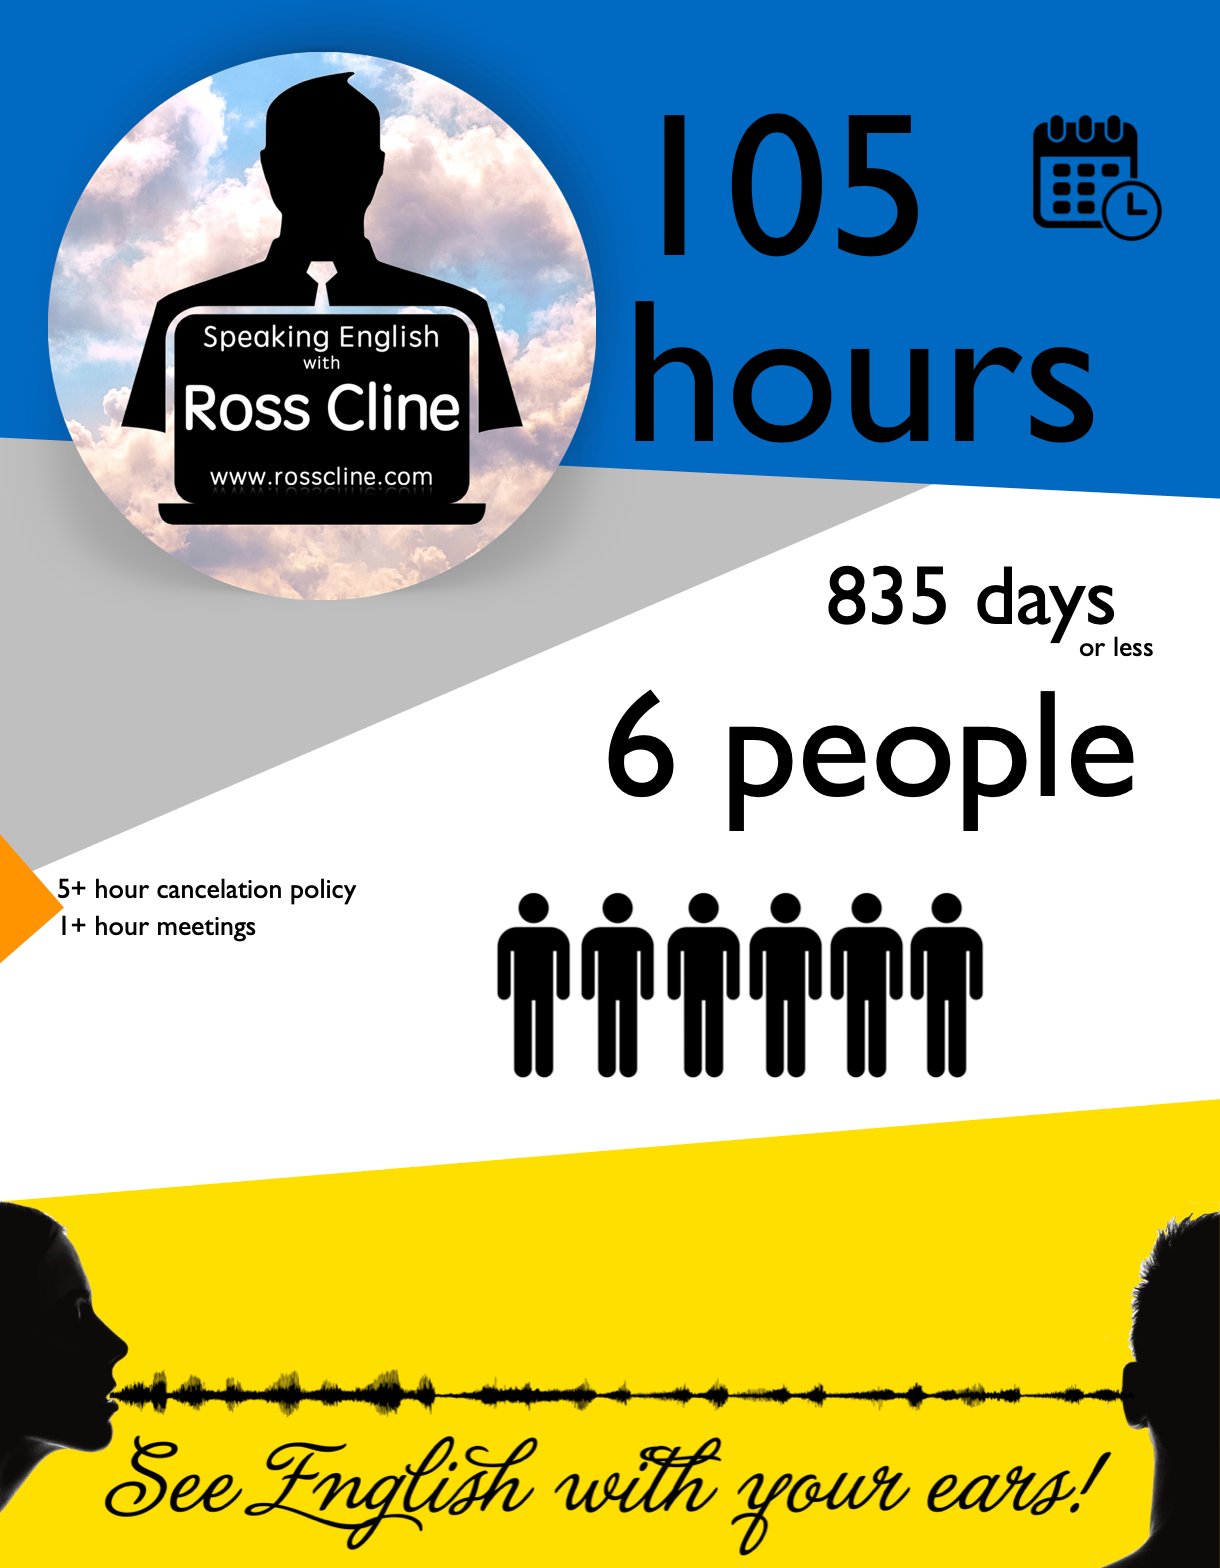 C.) 105 hours of Online Time for 6 people - www.rosscline.com